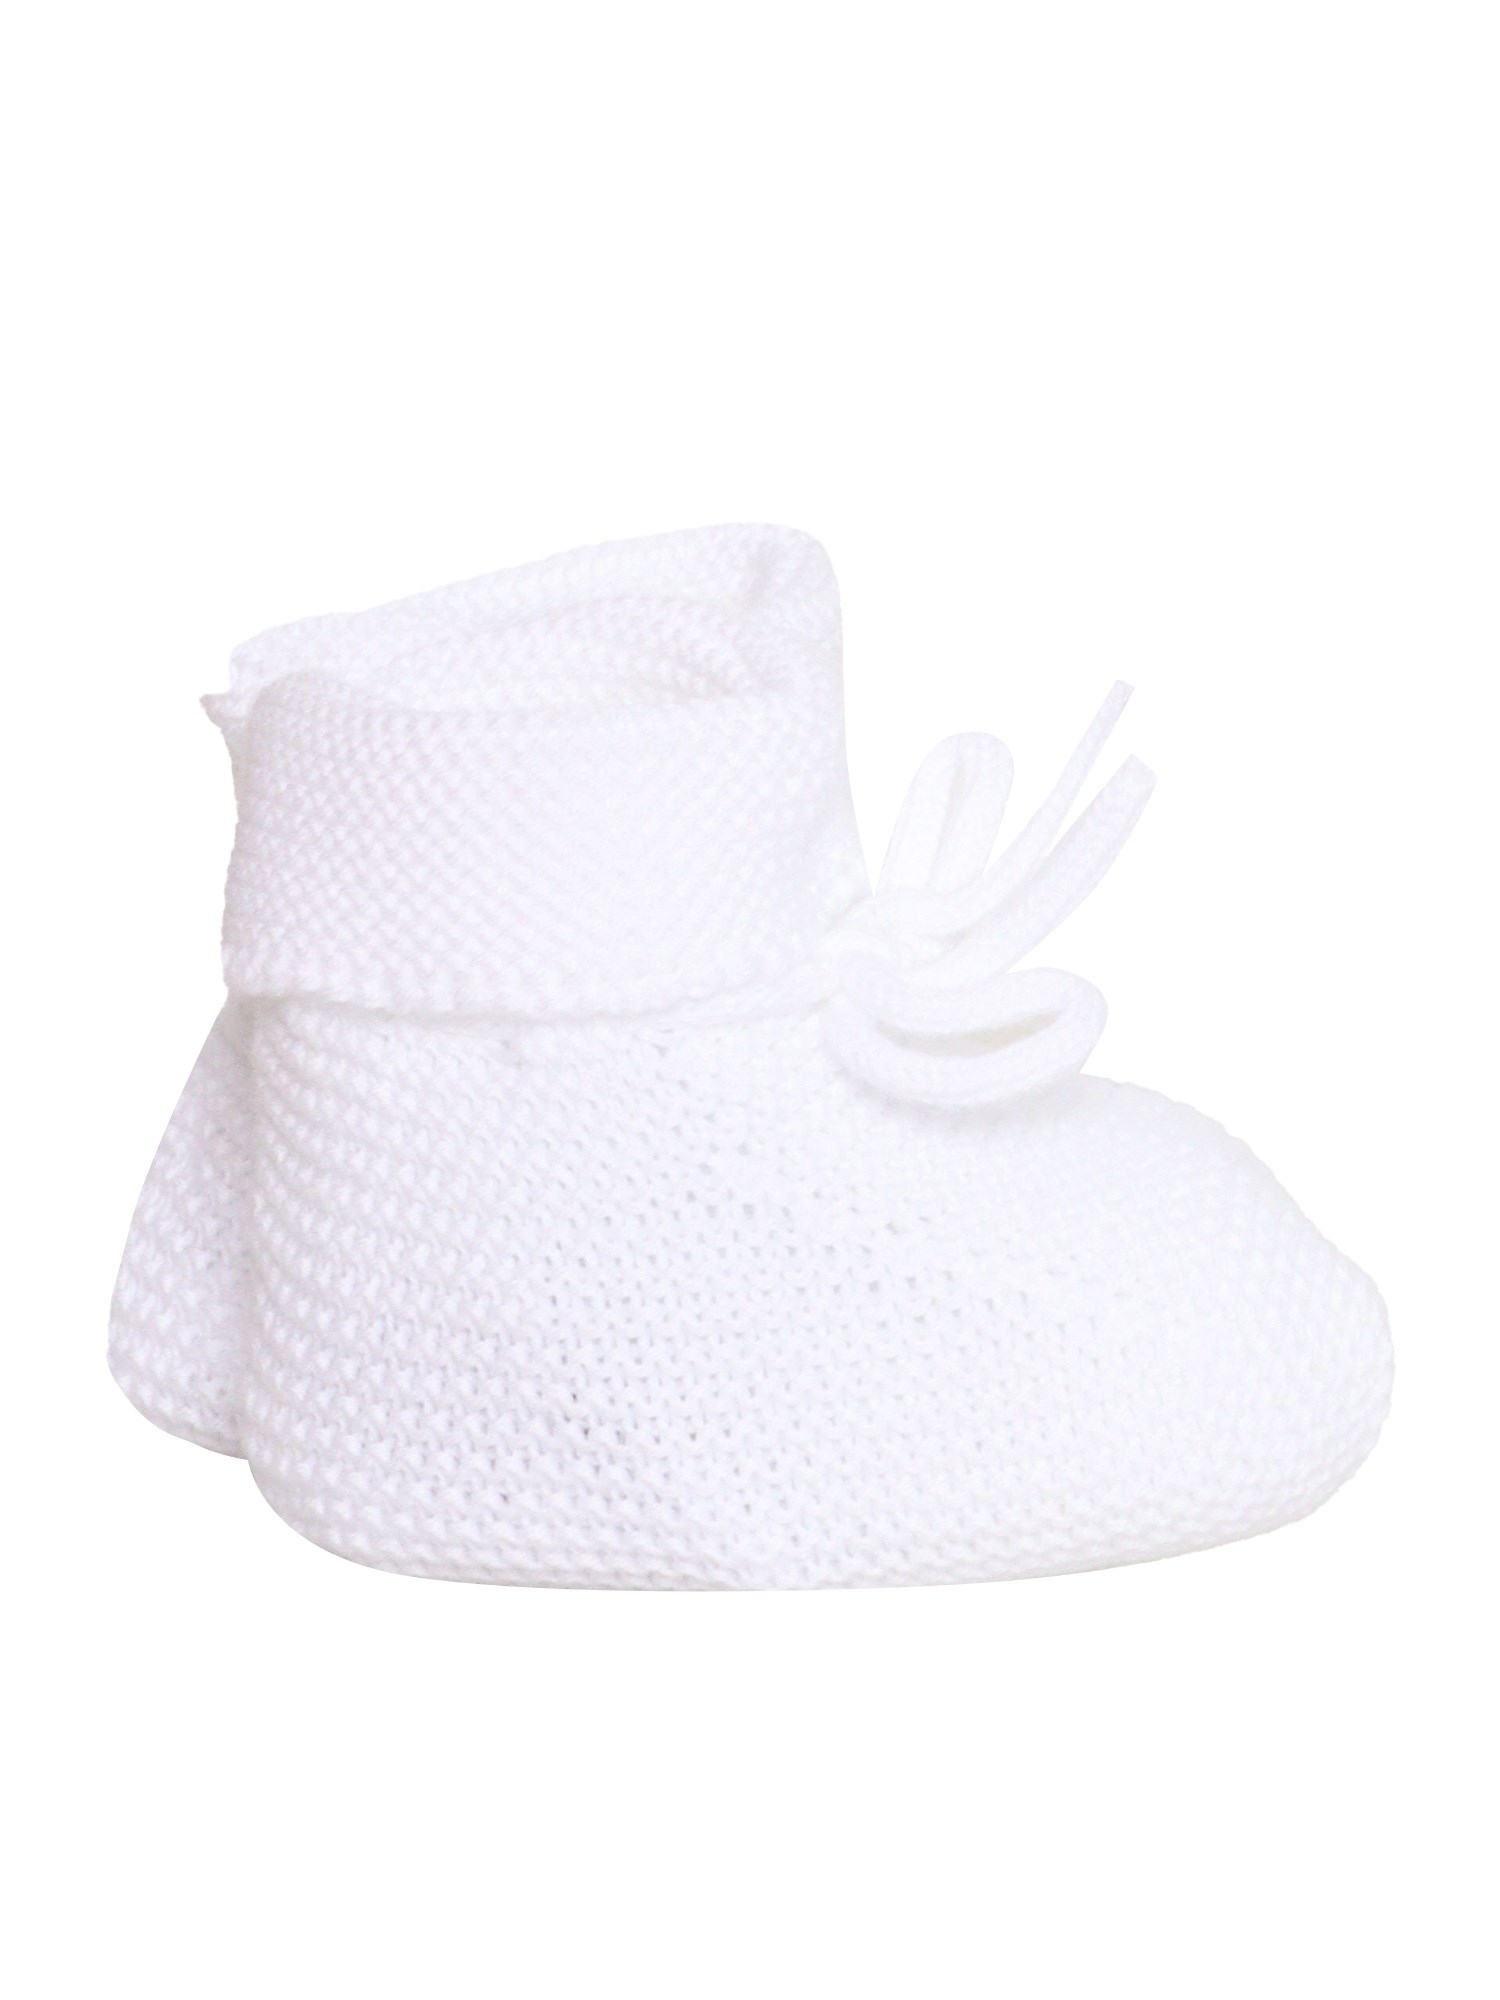 Paz Rodriguez Baby Shoes In White